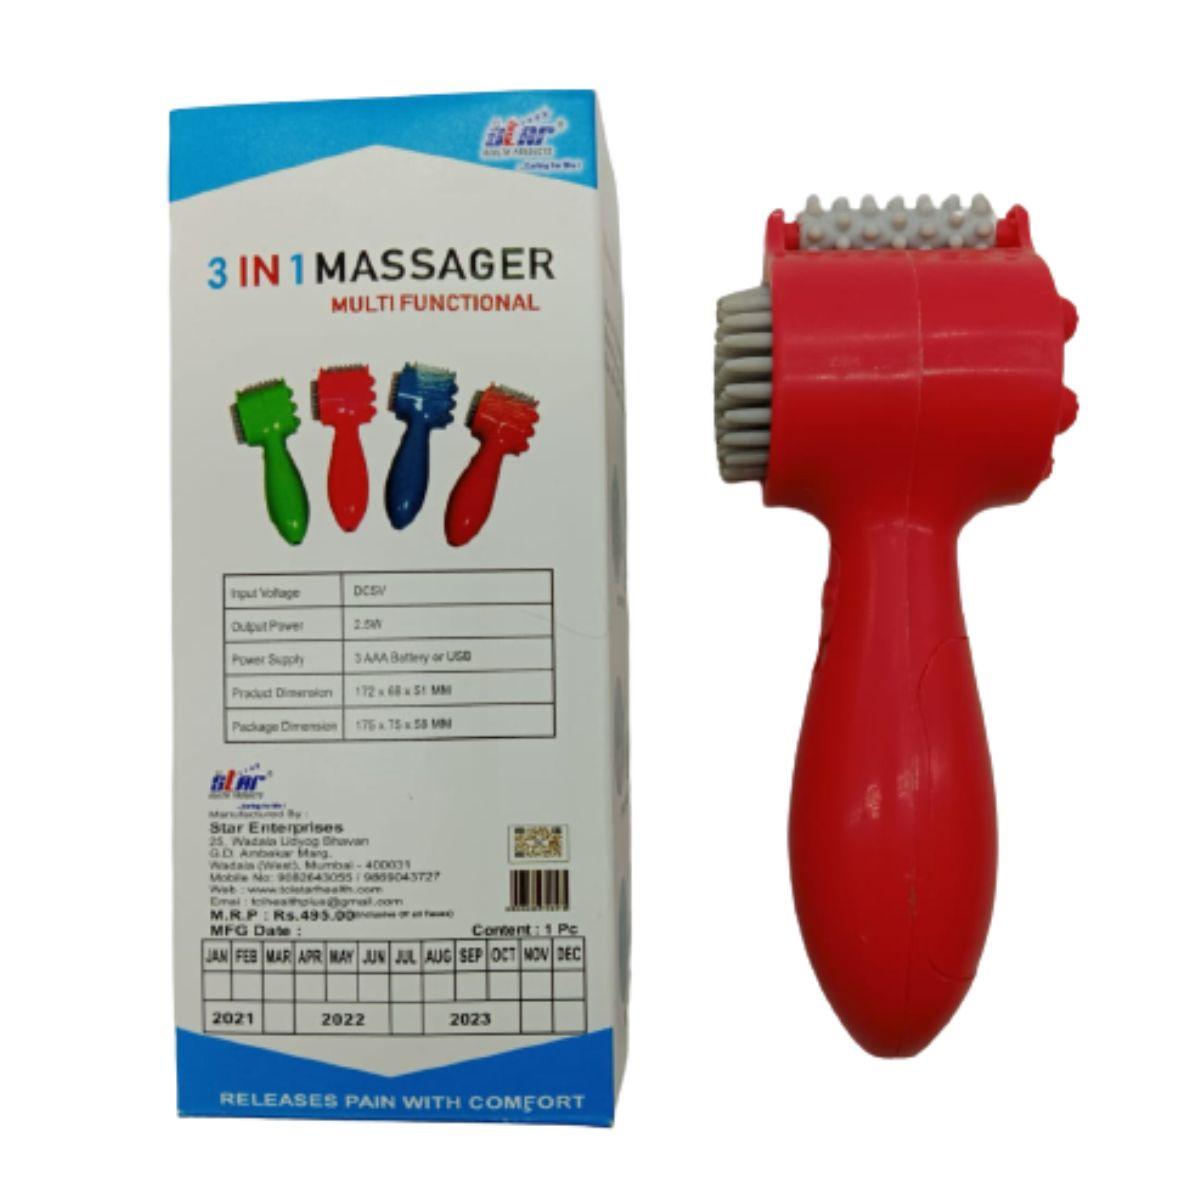 3 IN 1 Massager - tcistarhealthproducts